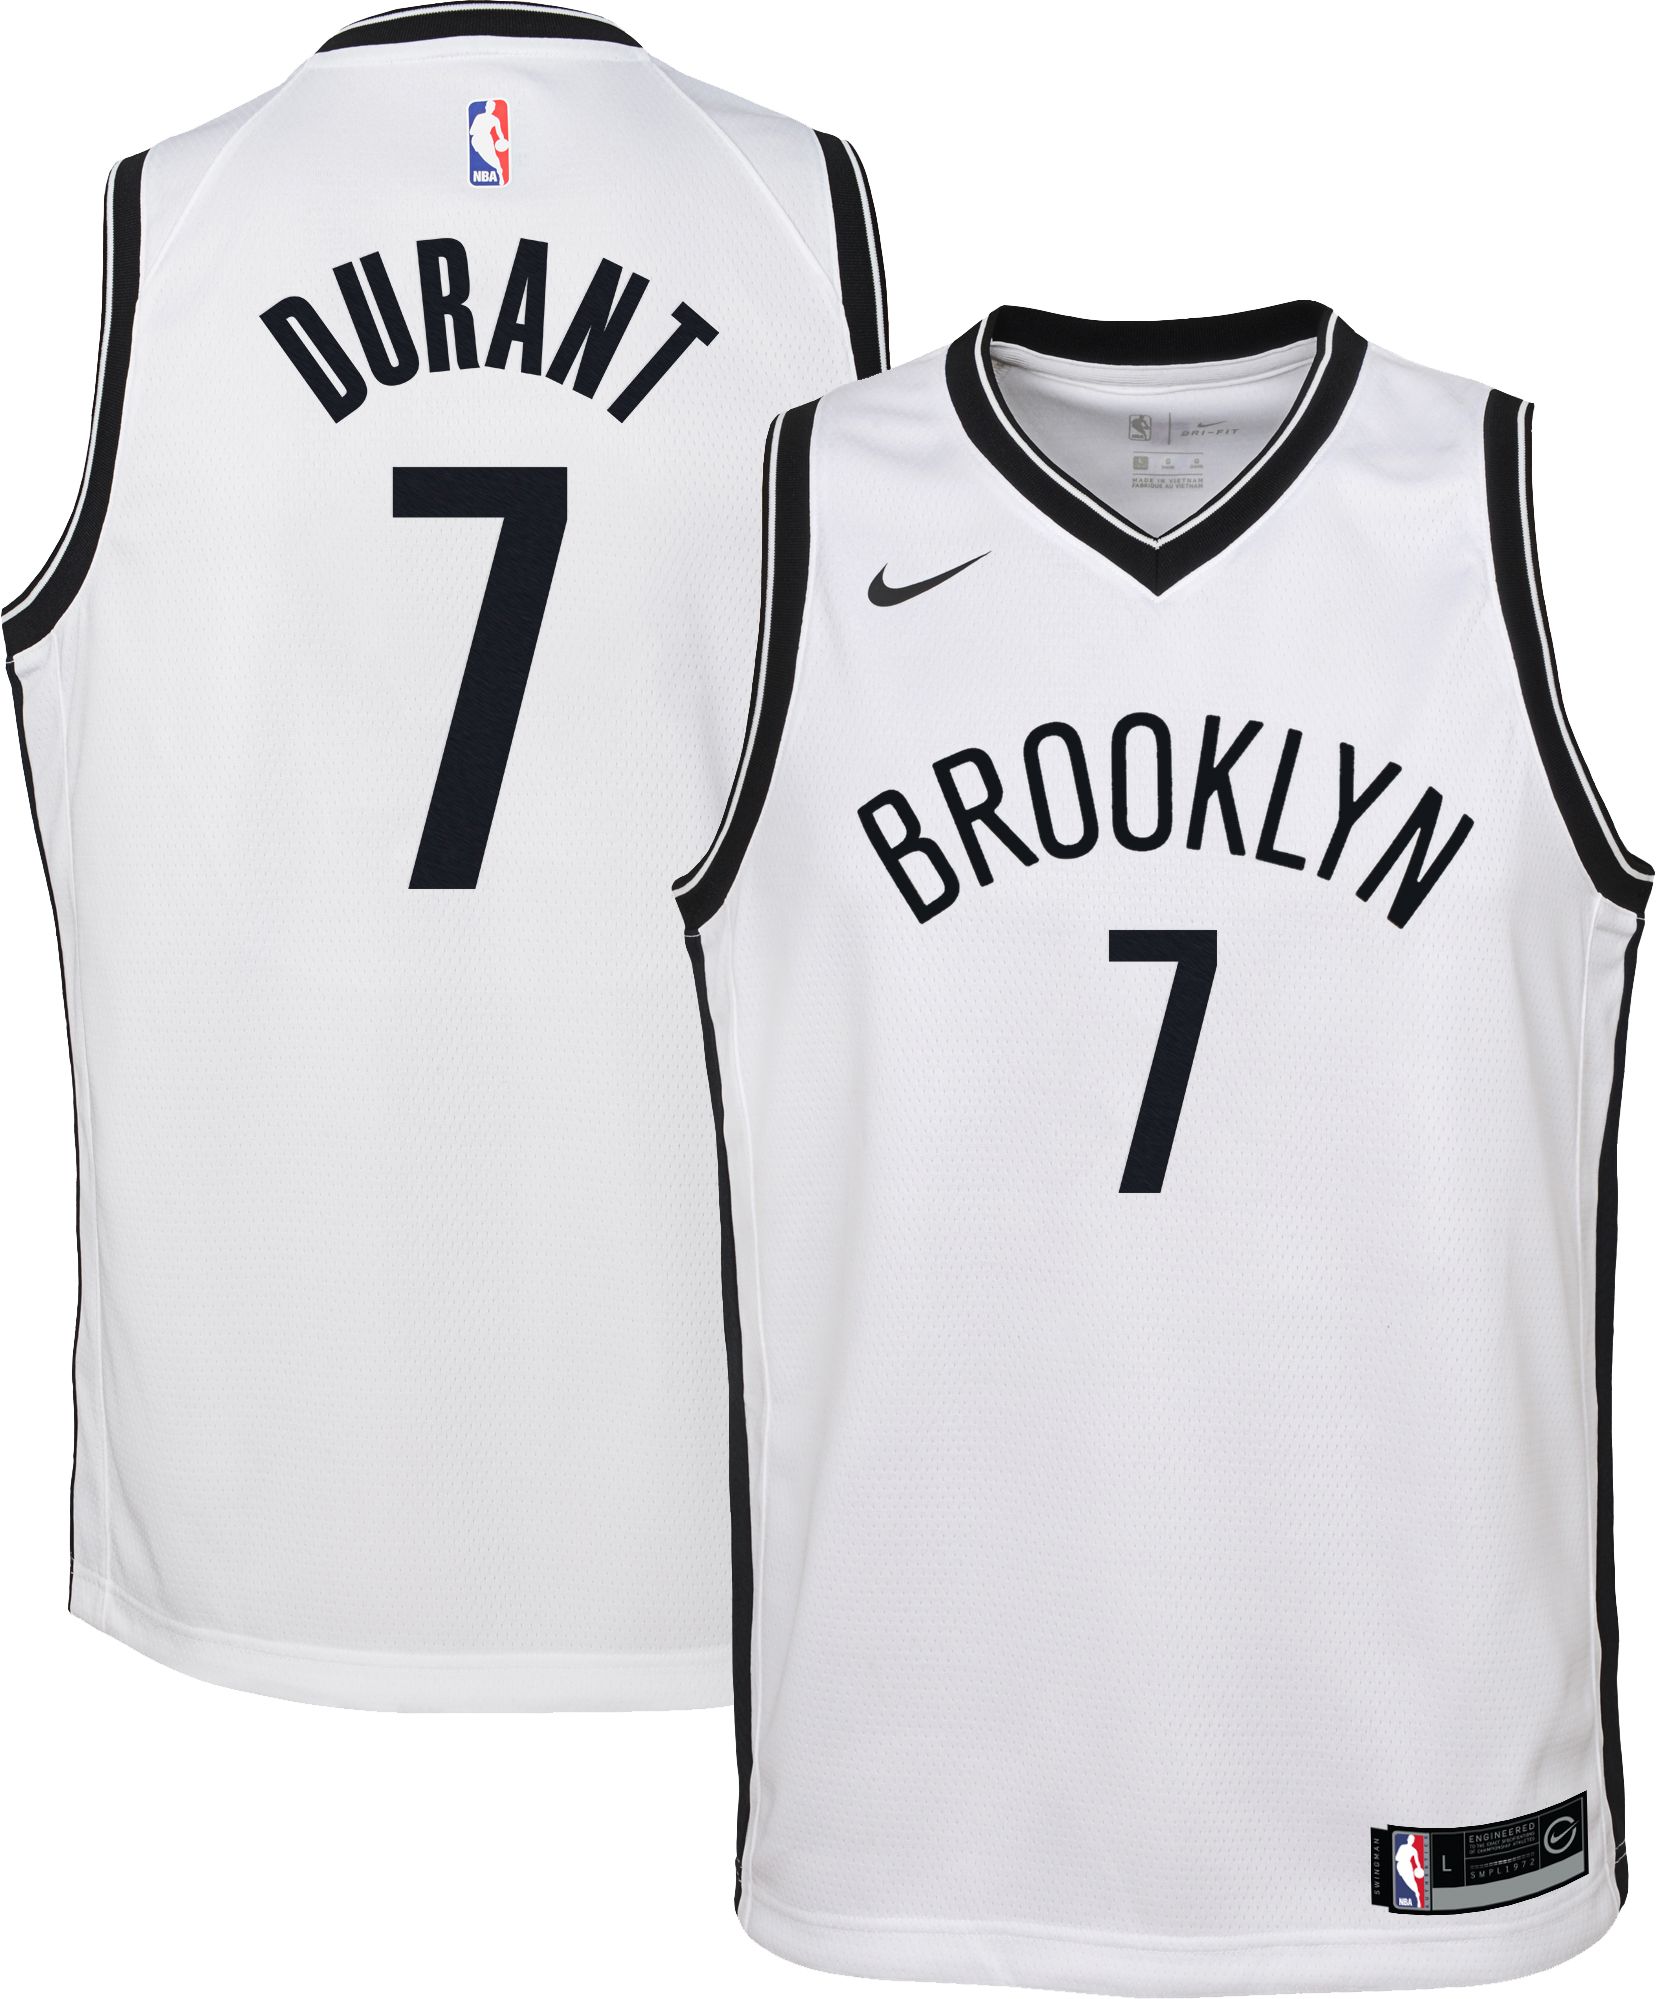 kevin durant nets jersey youth